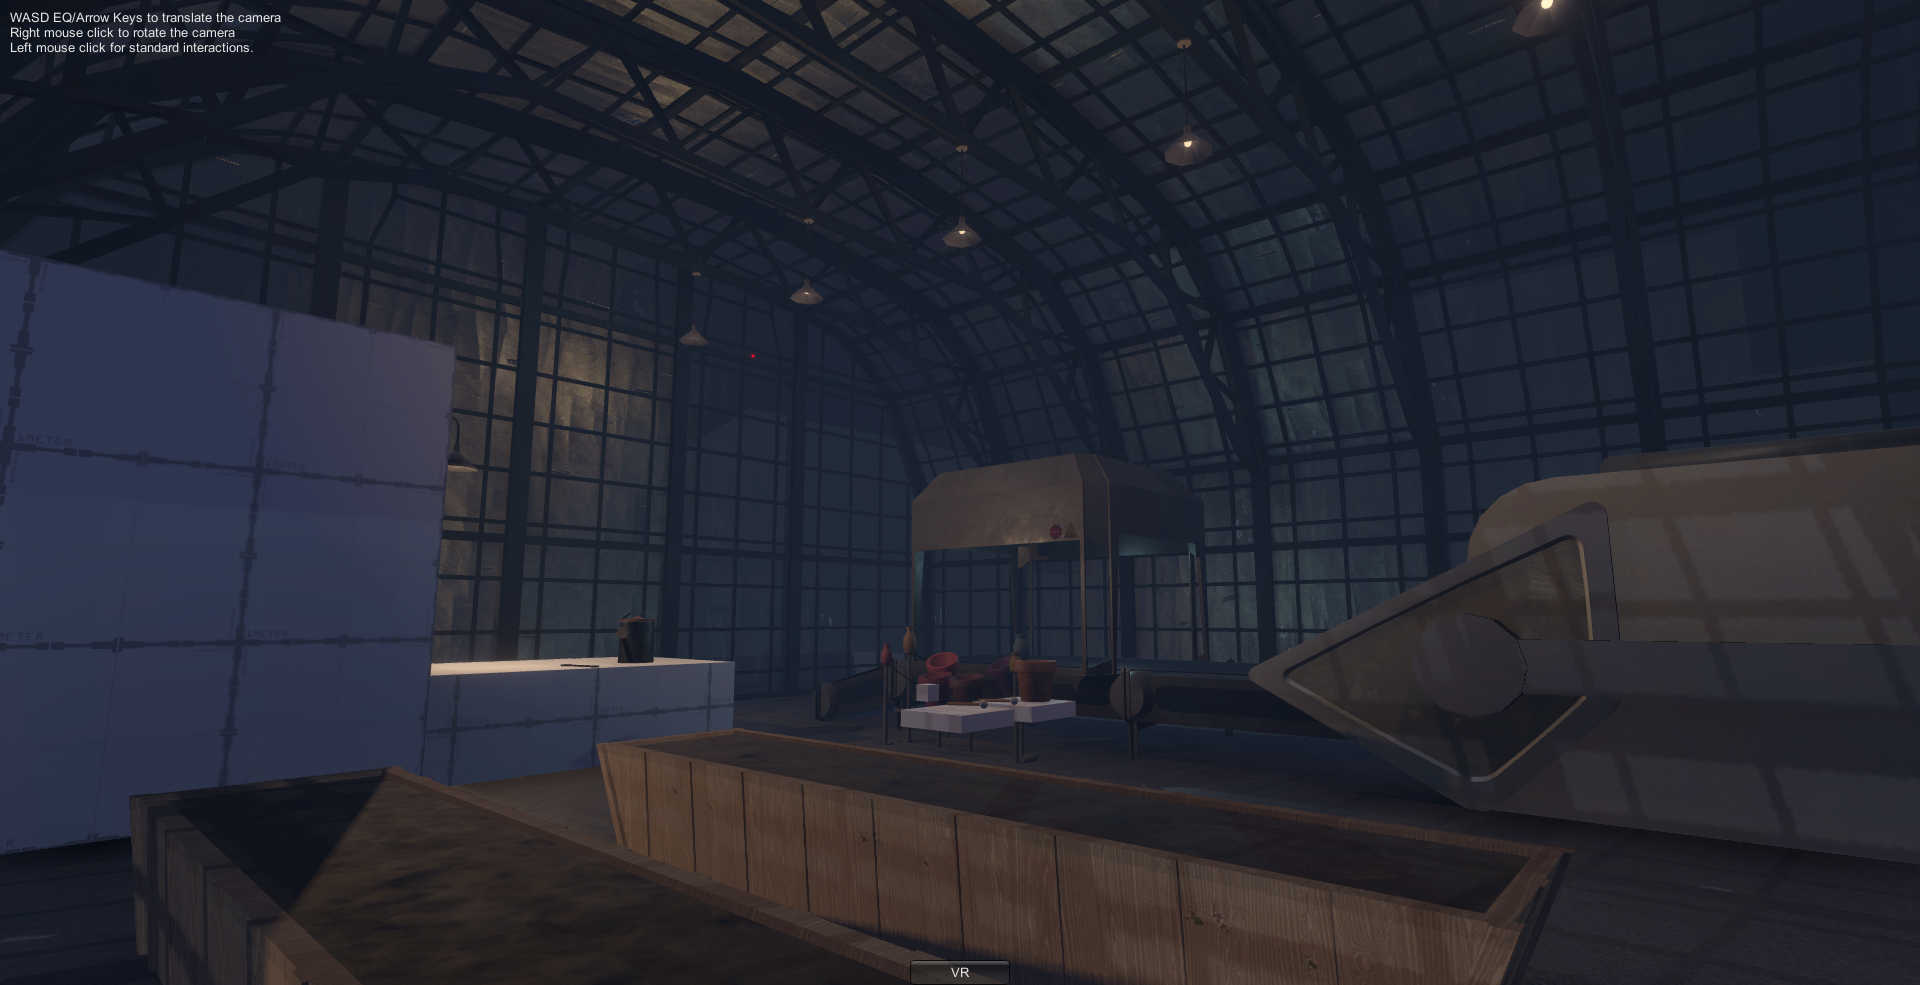 Greenhouse interior from player height. Conveyor belt chassis implemented.